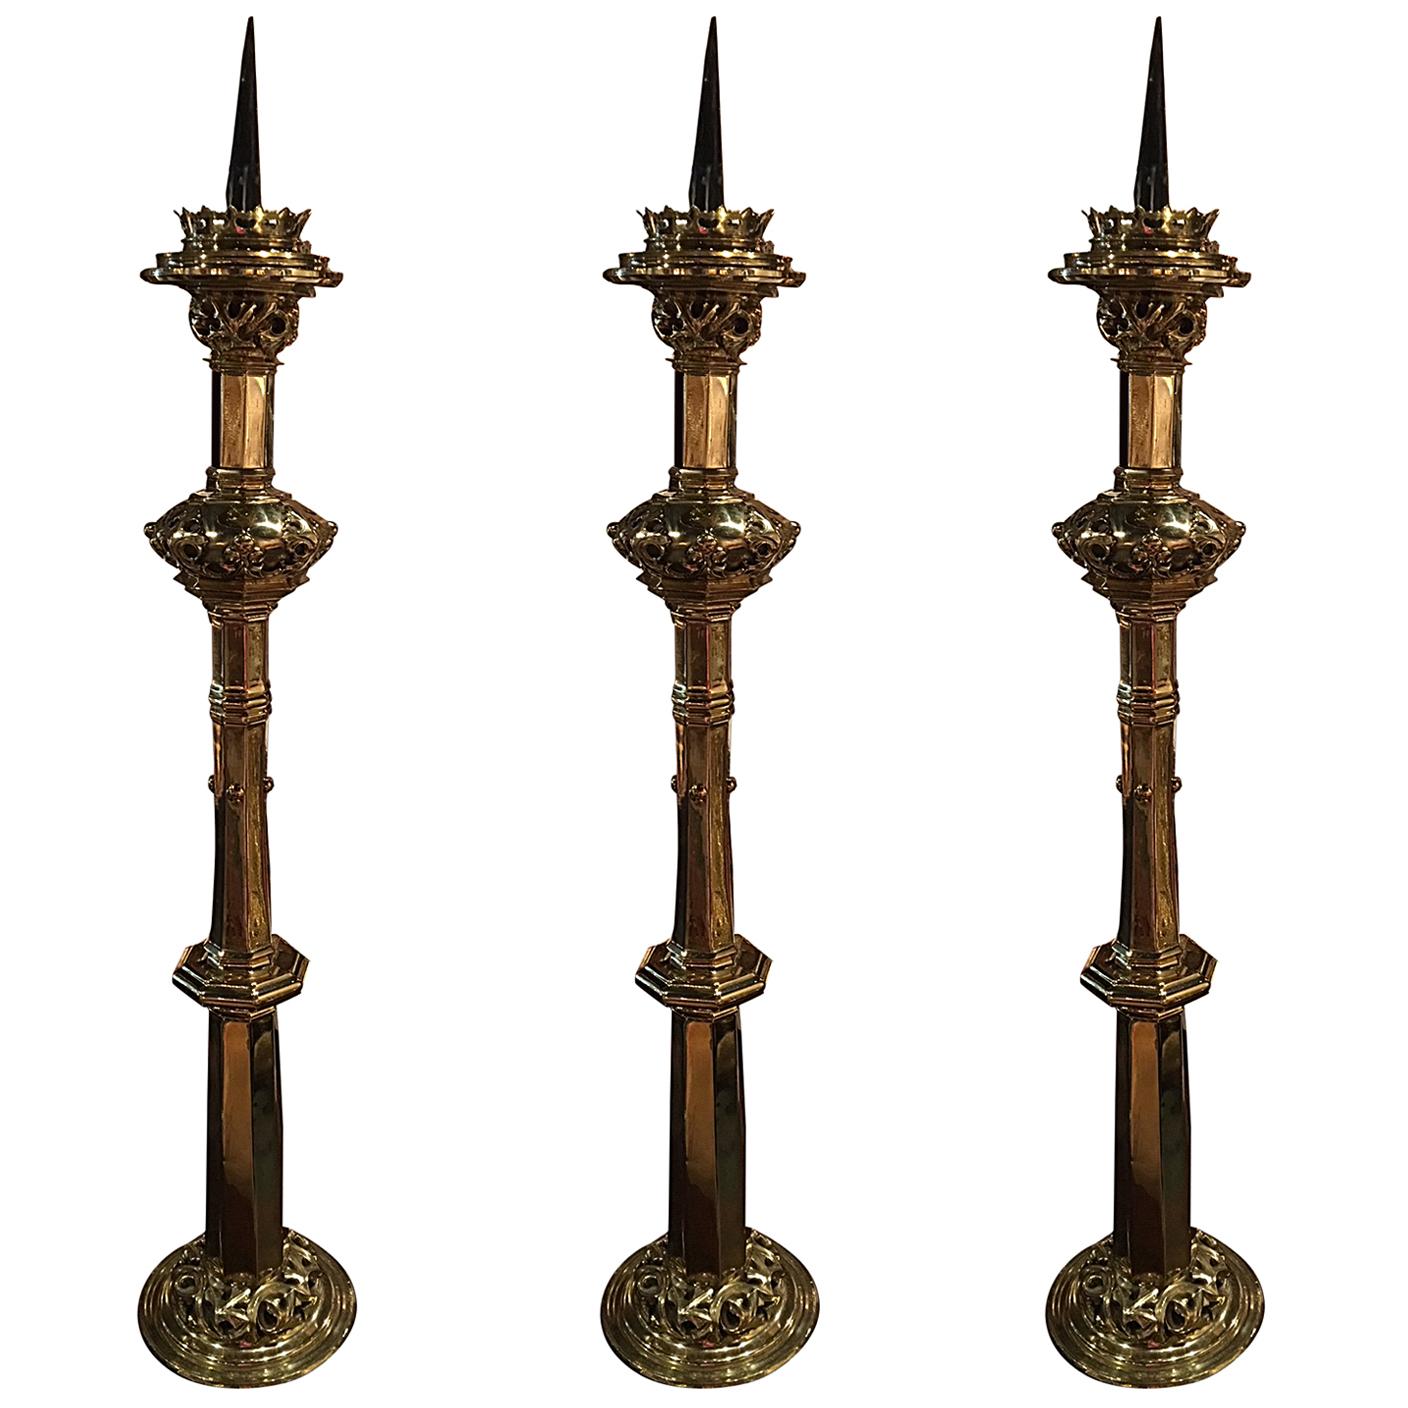 Polished Brass Set of Three Tall Torchere, Candlestick or Prickets, 19th Century